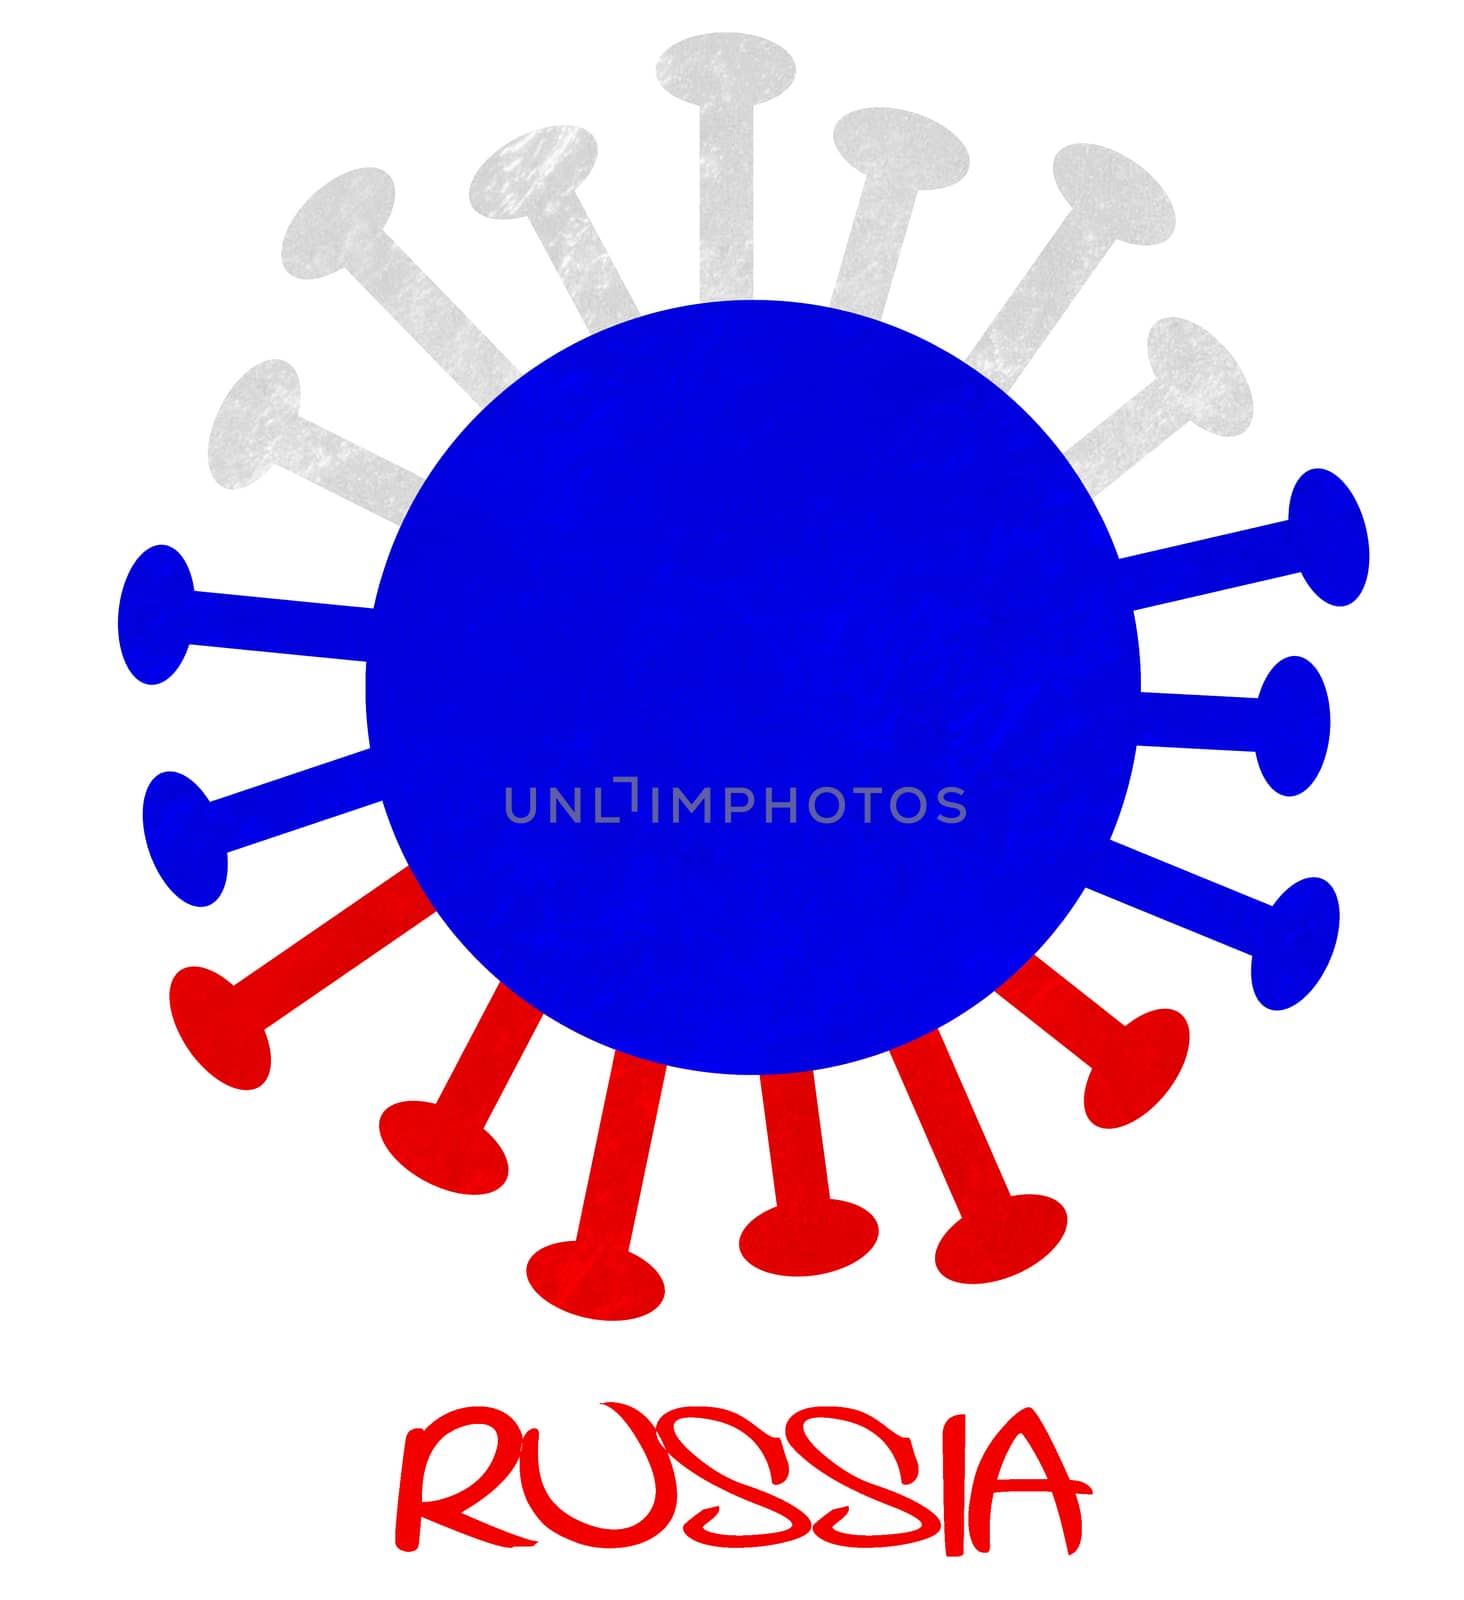 The Russian national flag with corona virus or bacteria by michaklootwijk